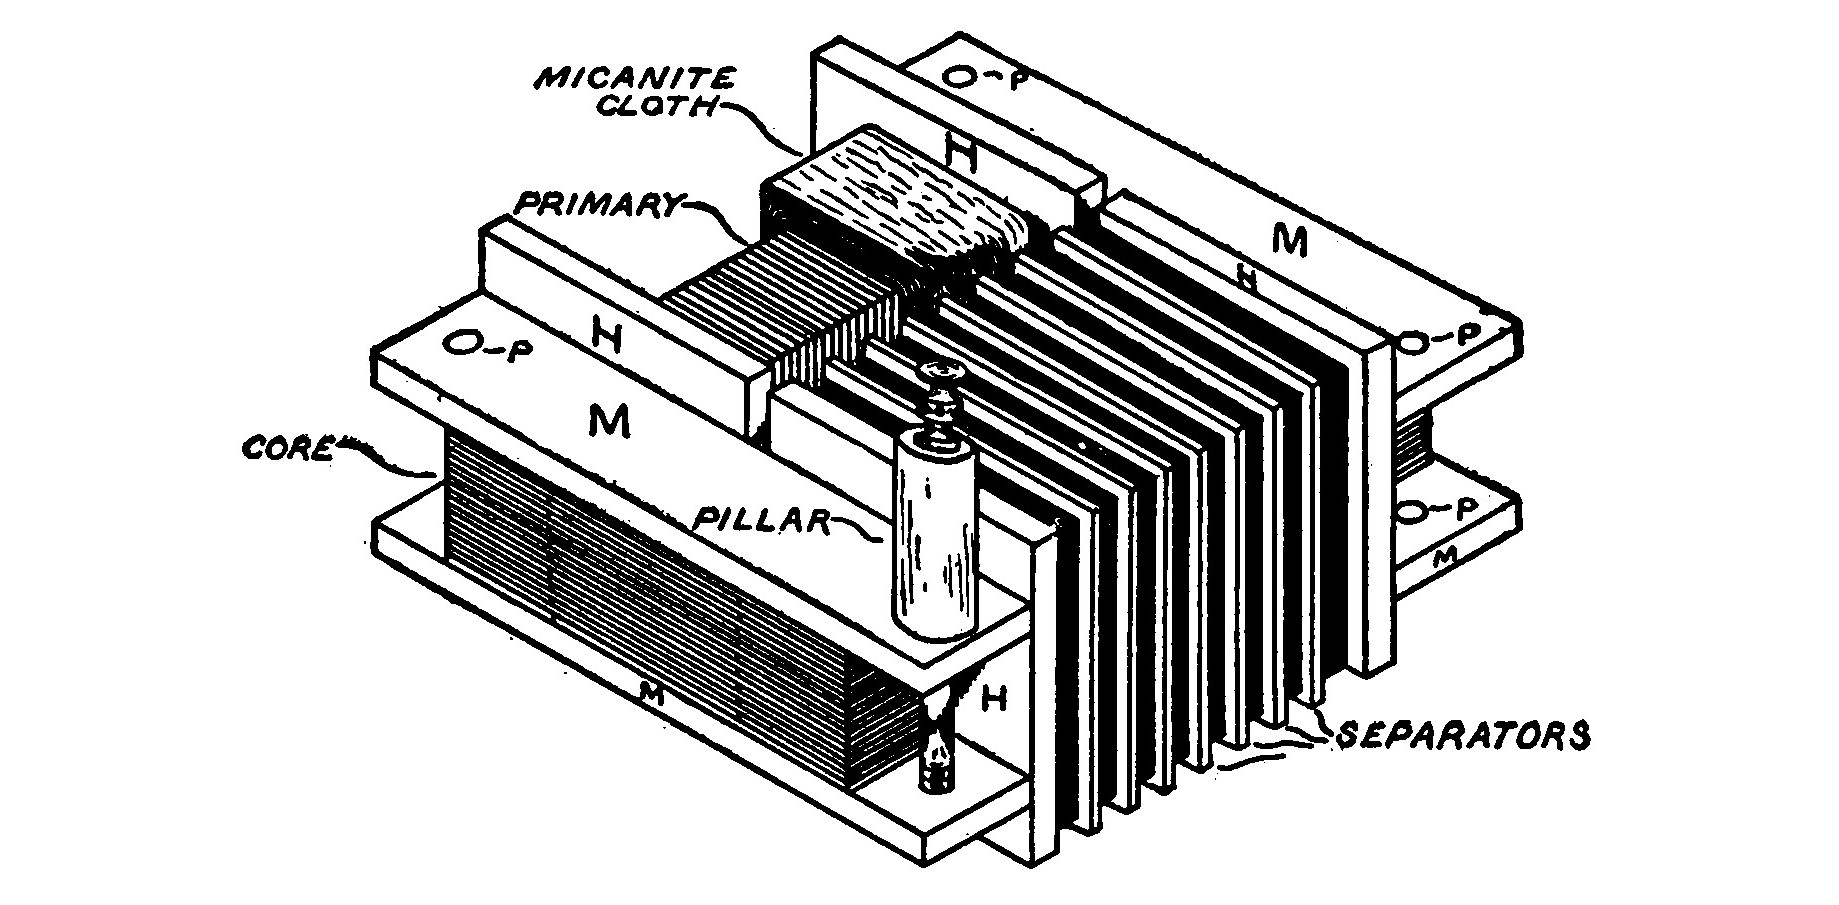 Fig. 49. Transformer with One Secondary removed.